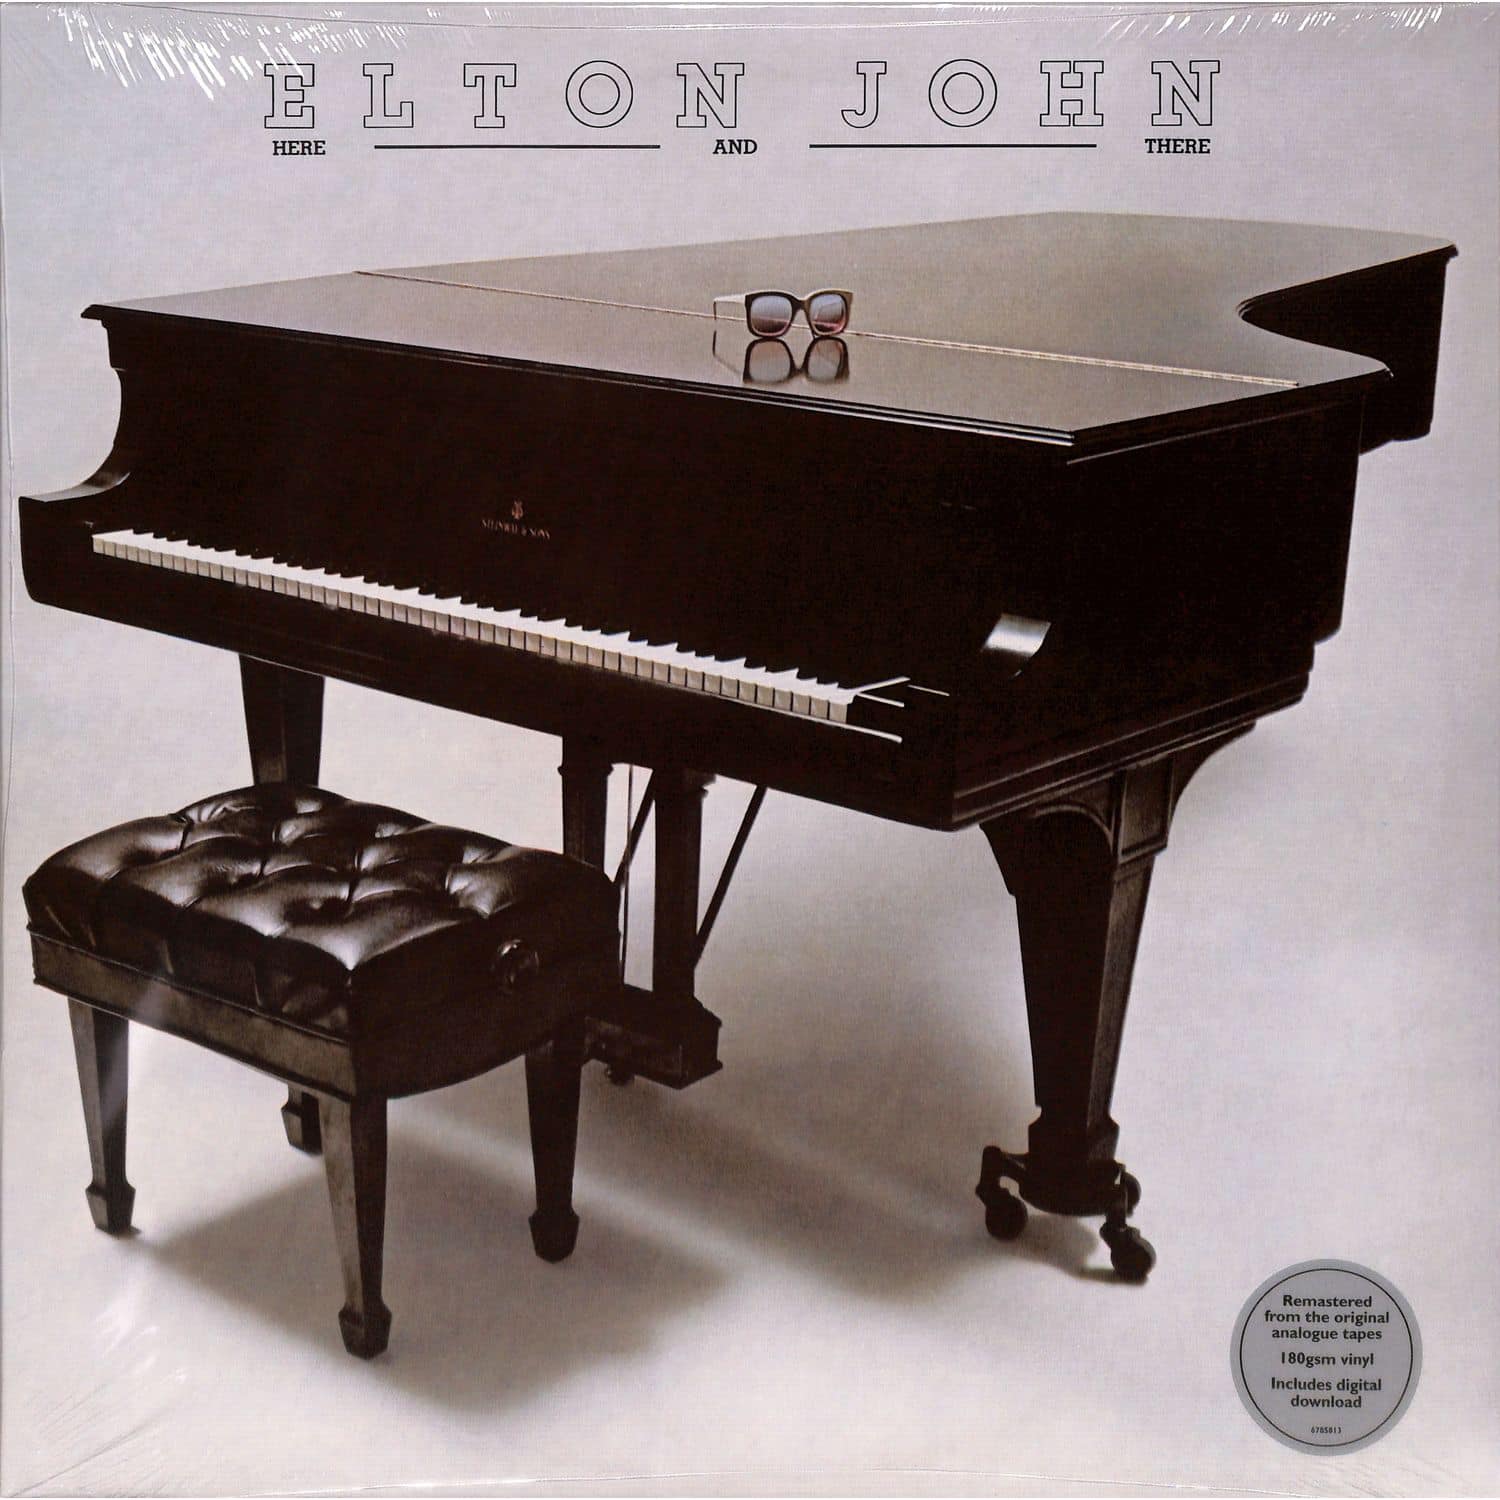 Elton John - HERE AND THERE 